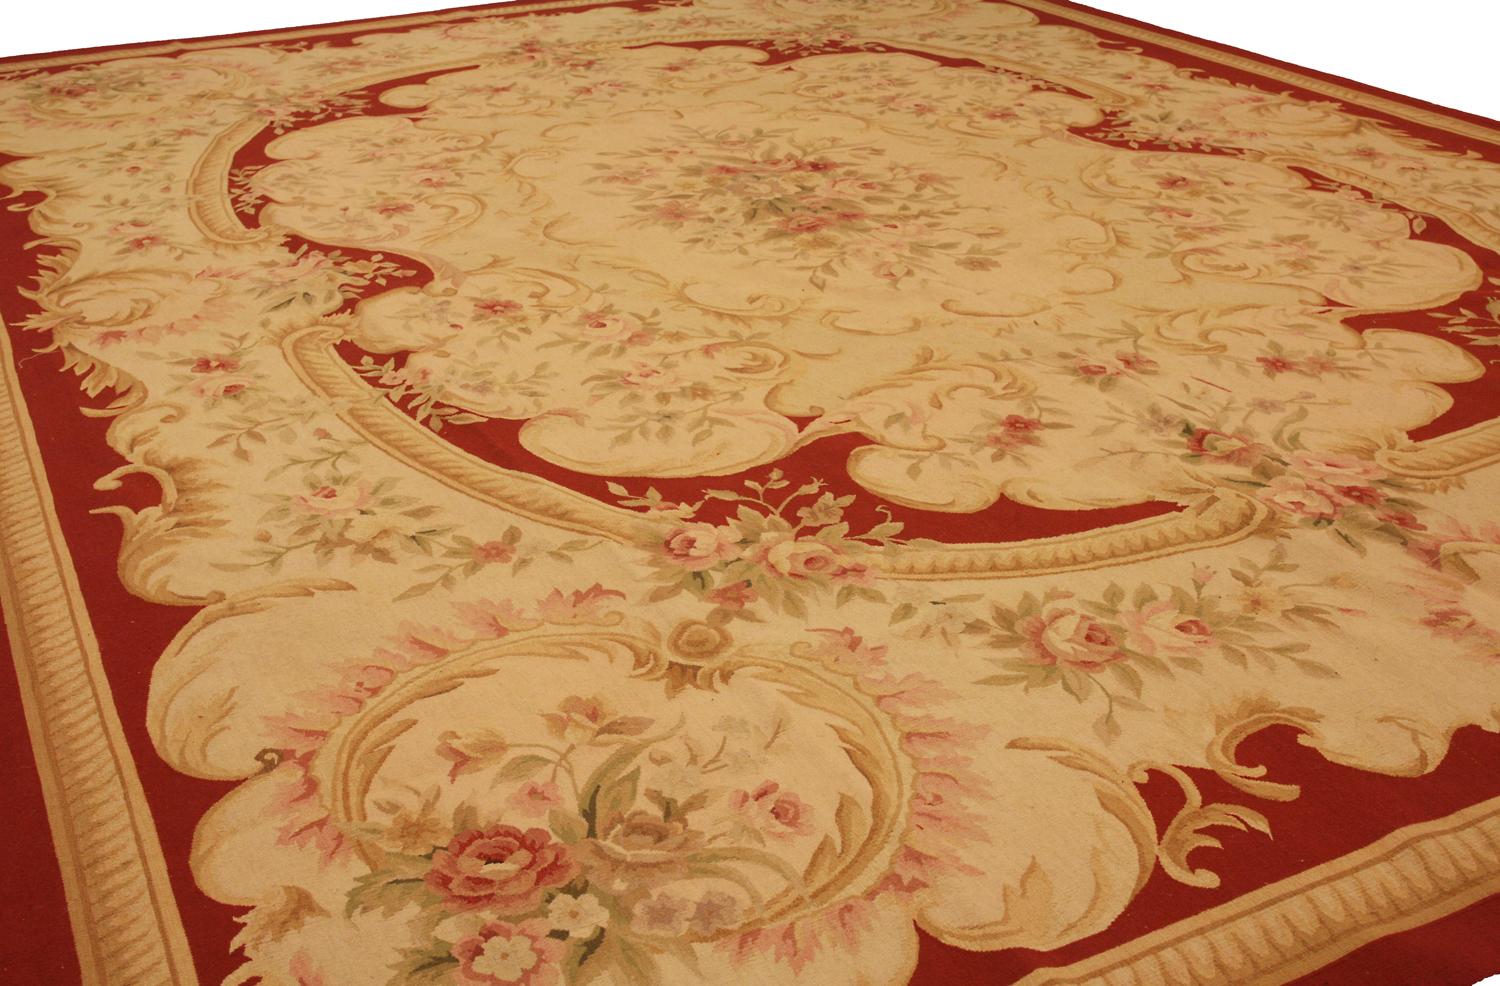 Hand-Knotted Aubusson Rug Lockcloth Victorian Style Chinese,  21st Century